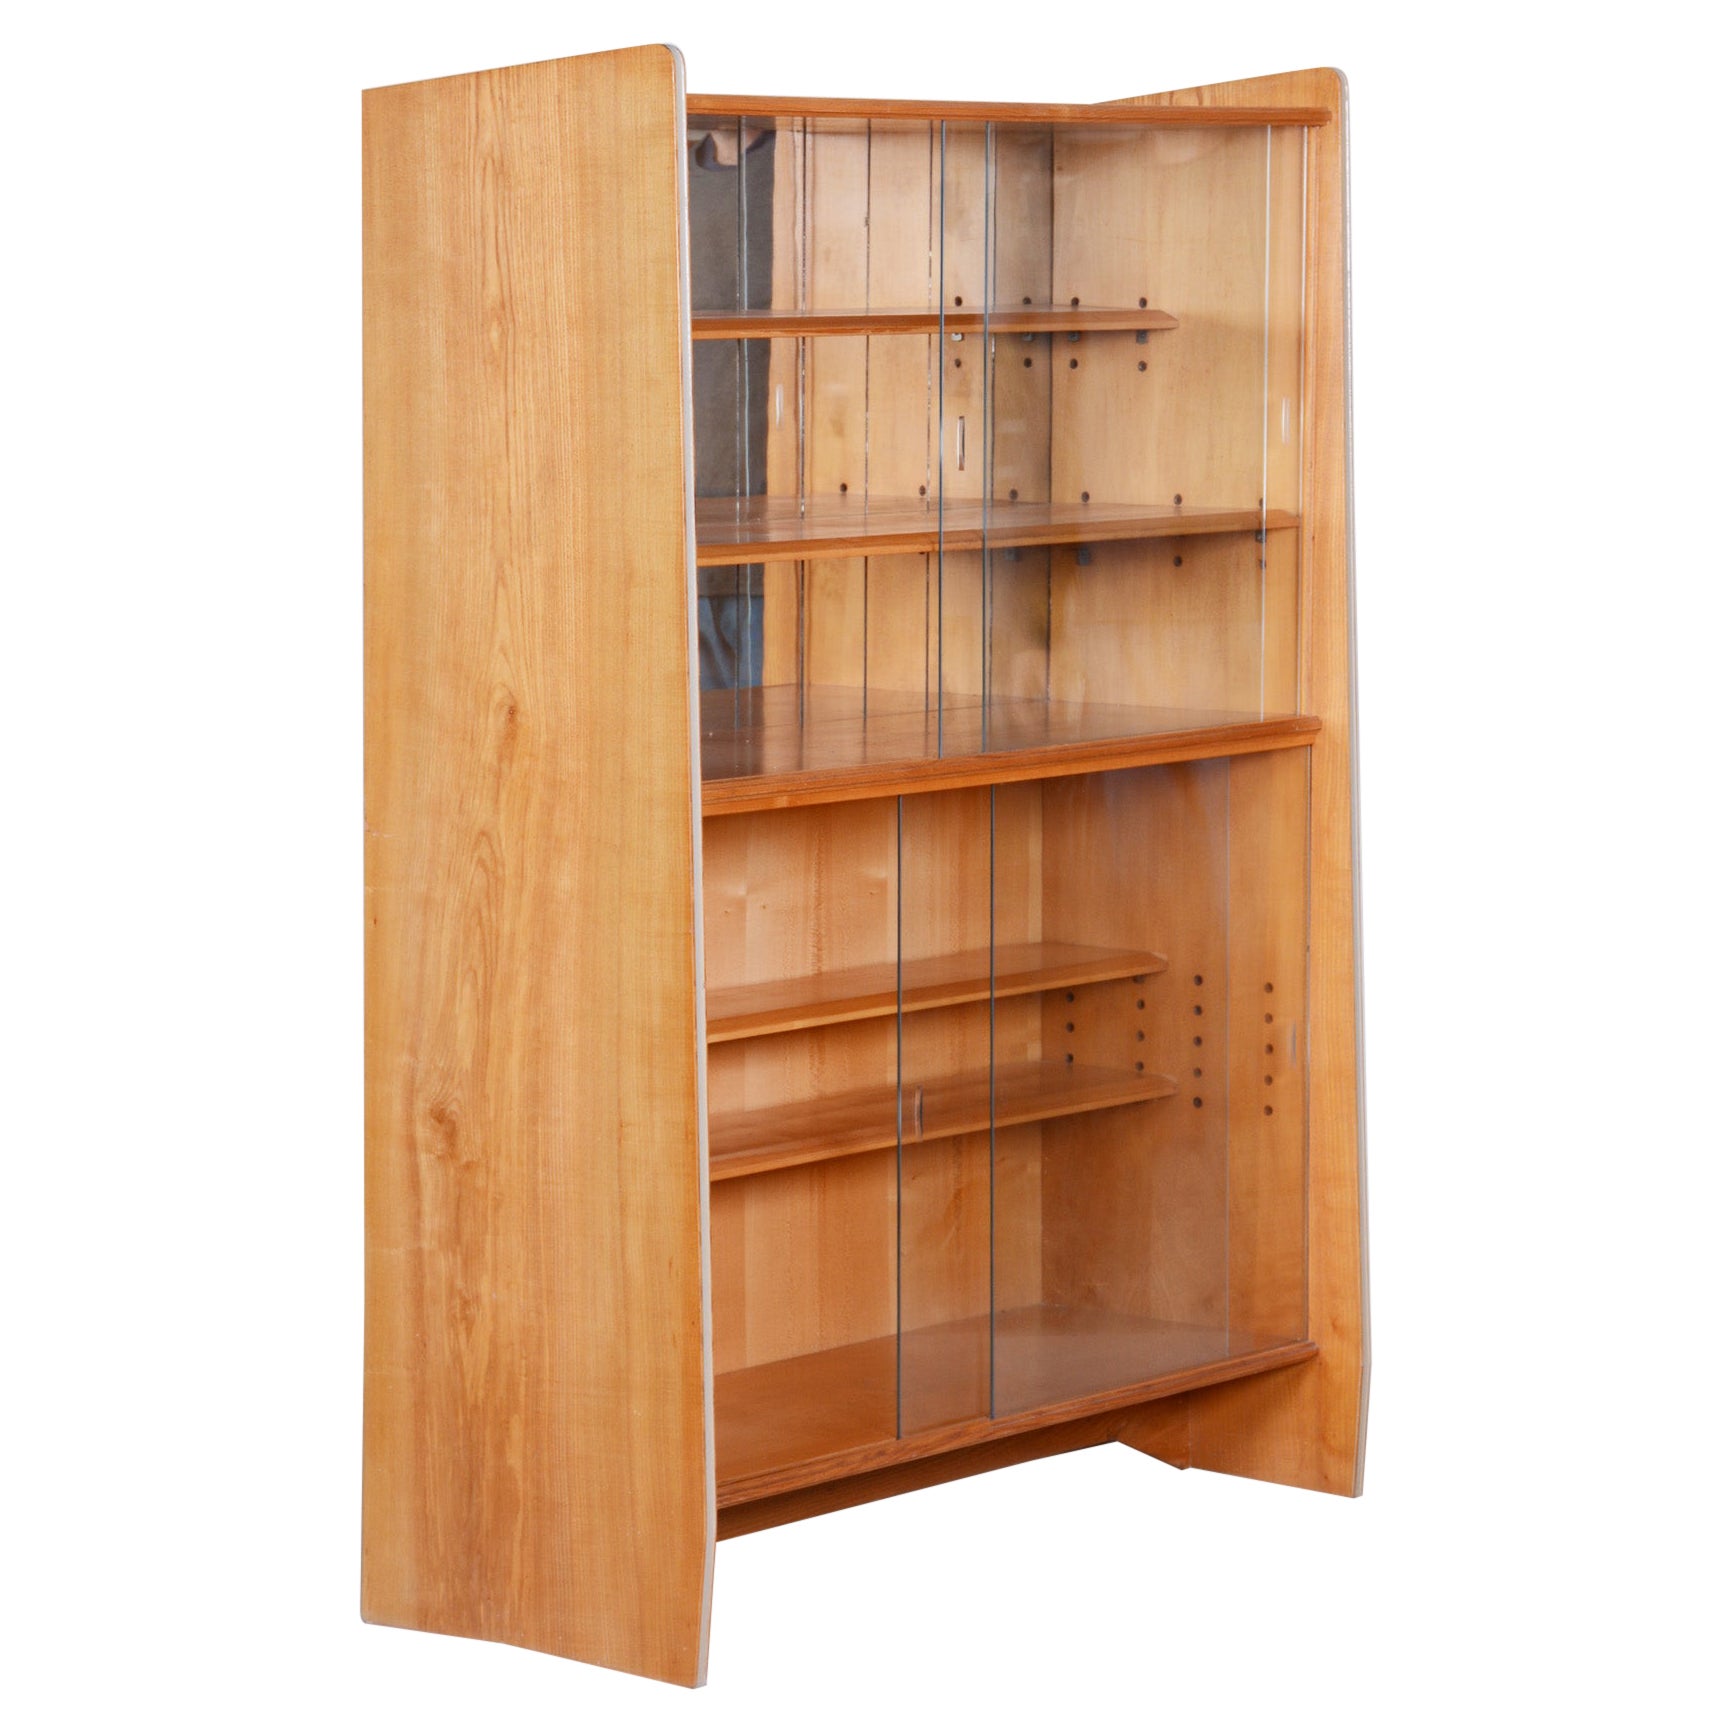 Unique Czech Ash Mid-Century Bookcase, 1950s, Well Preserved Condition